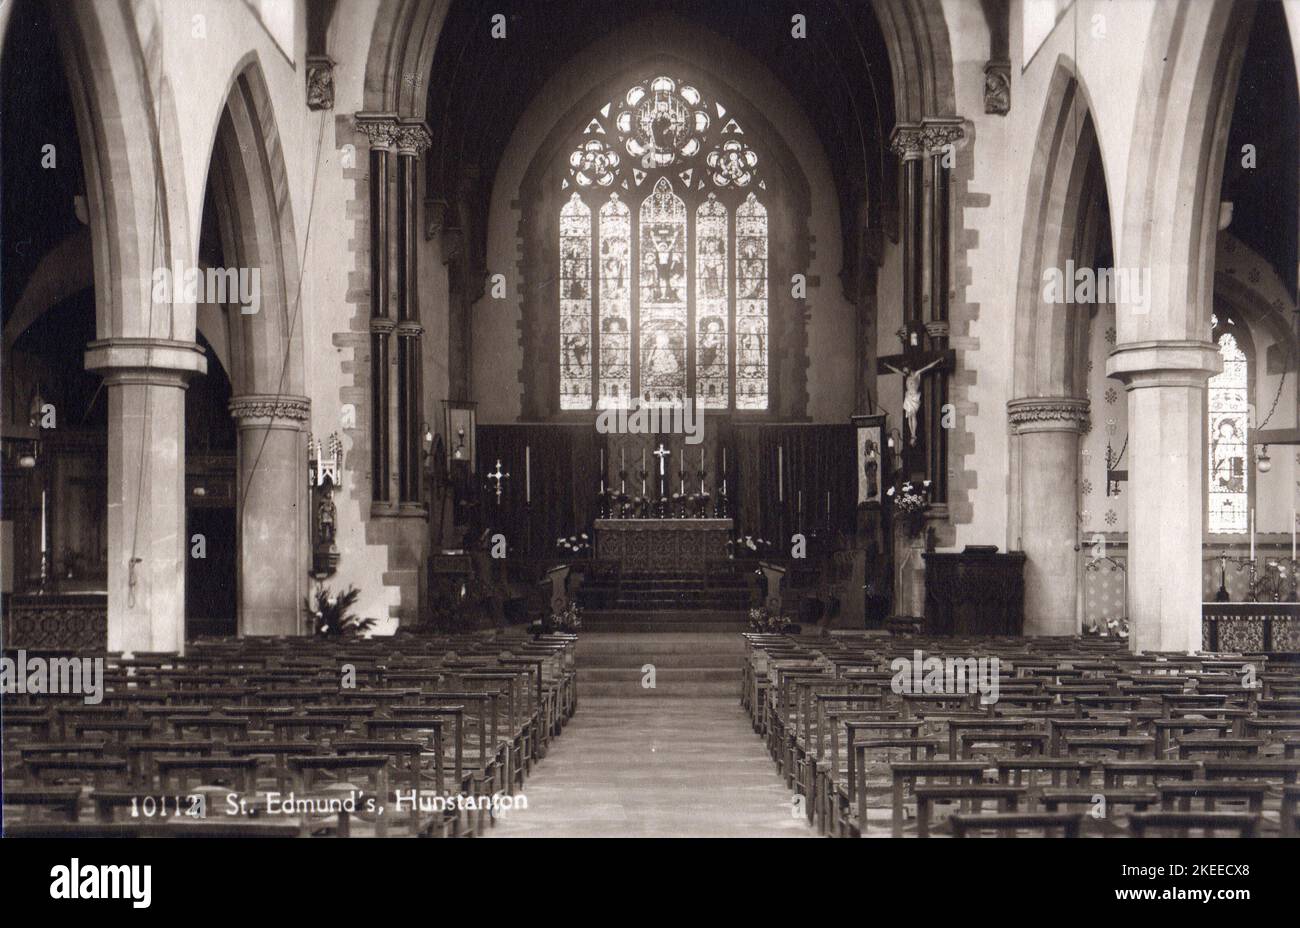 Interior of St Edmund's Church, Hunstanton, Norfolk looking east, from a postcard dated circa 1930s. The church was designed by Frederick Preedy and building works commenced in 1865. The original design called for a north west tower, but this was never built due to lack of funds. Stock Photo